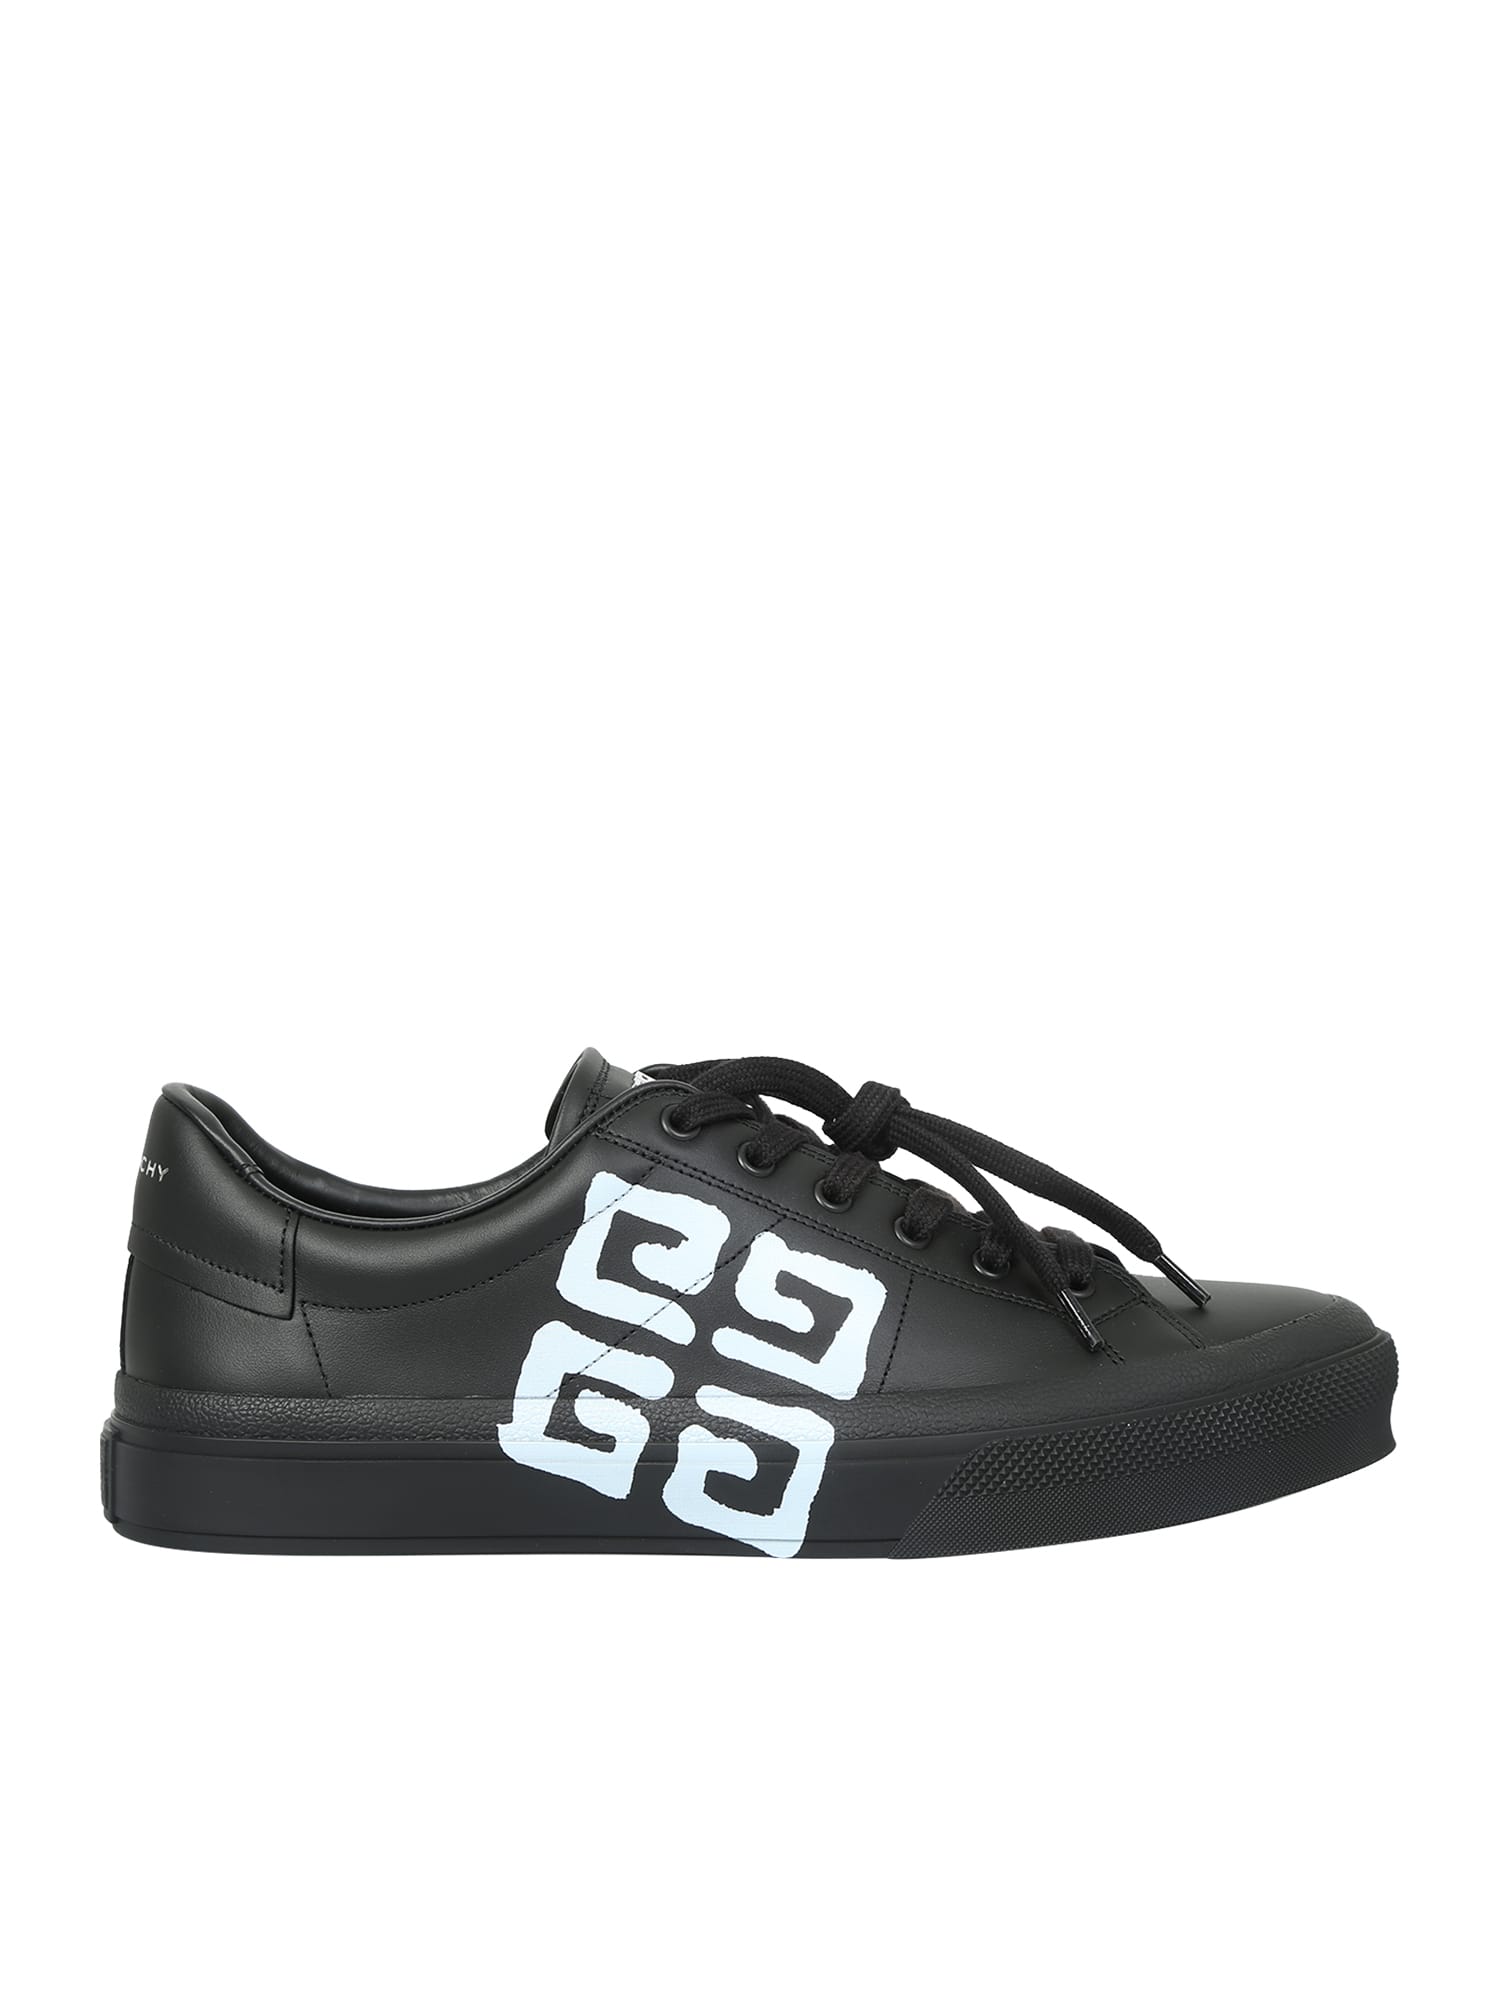 GIVENCHY 4G CITY SPORT trainers